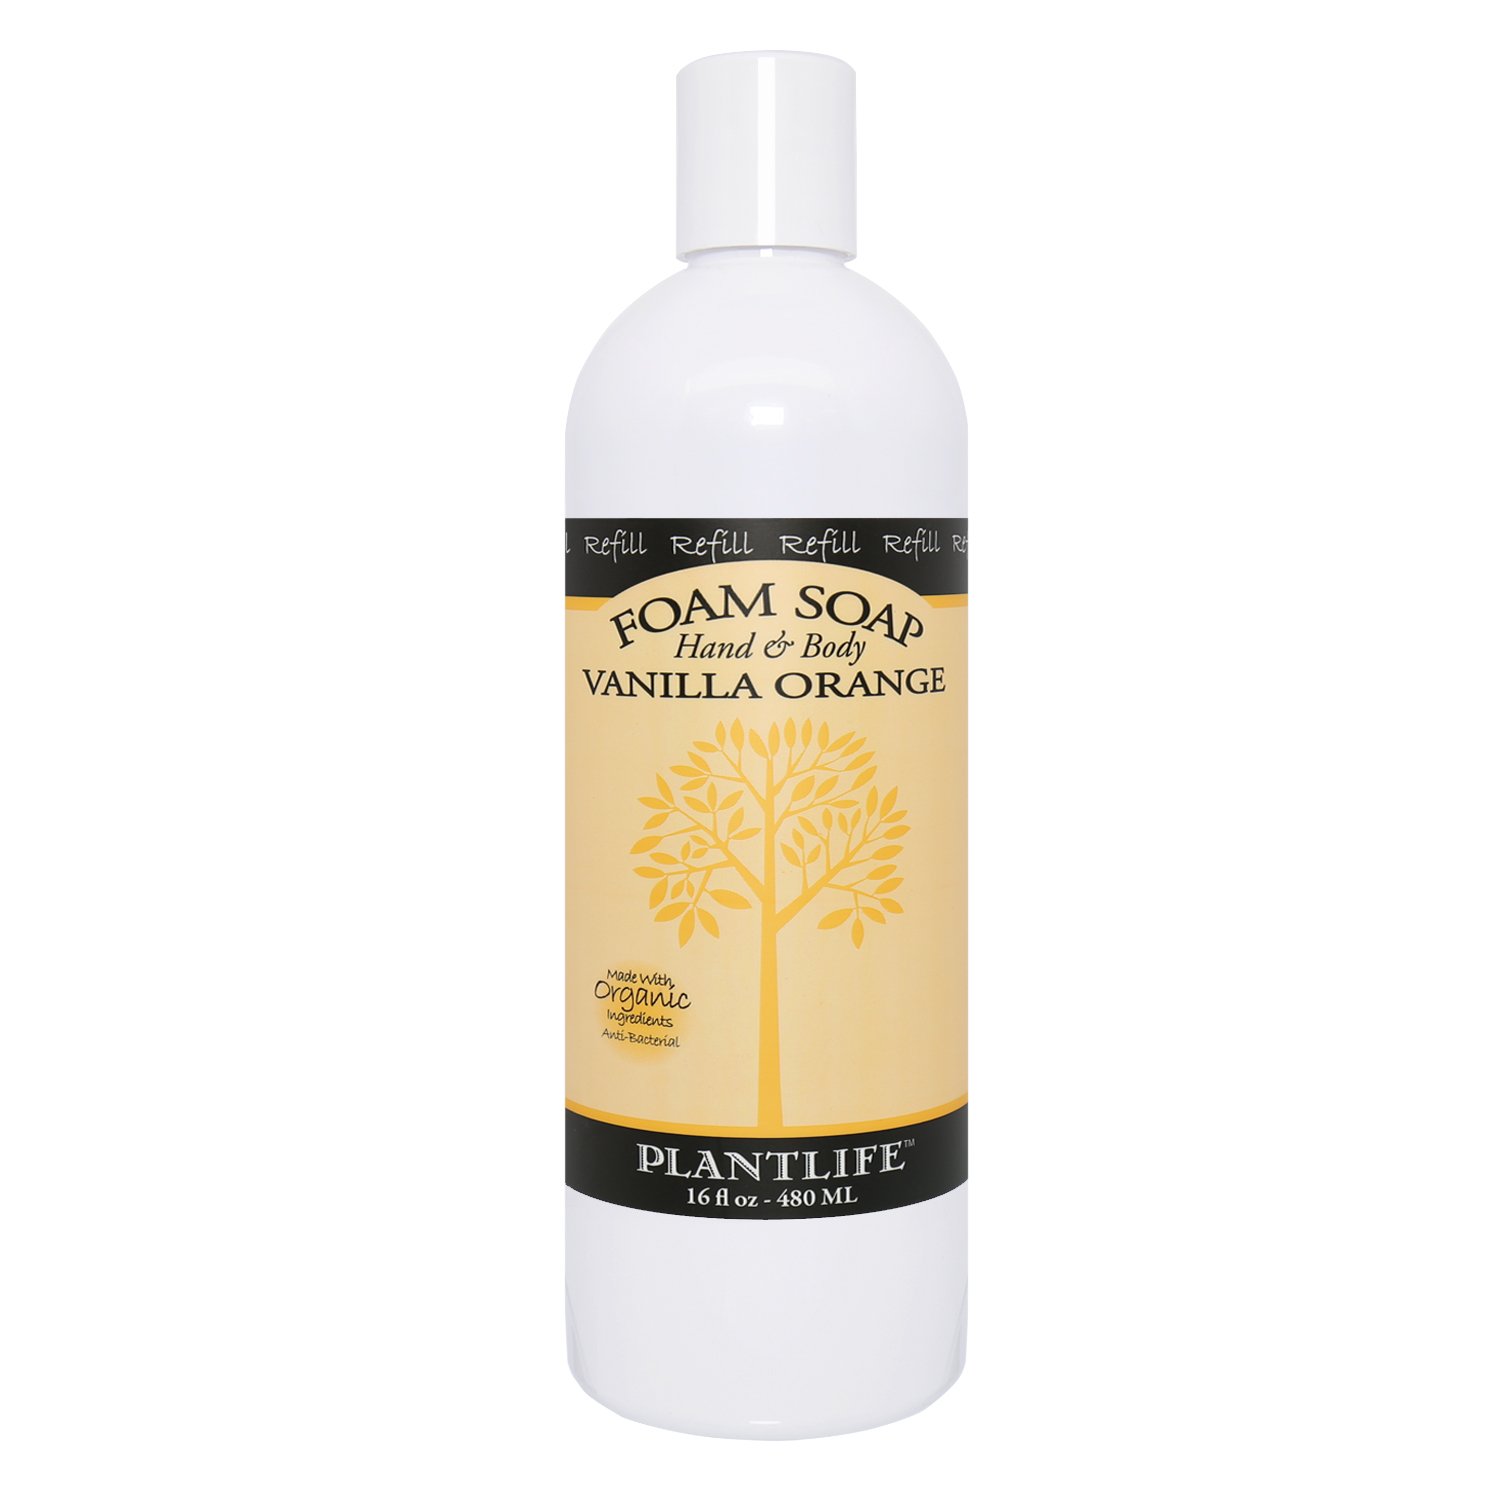 Plantlife Vanilla Orange Foam Soap Refill - Gentle, Moisturizing, Plant-based Foam Soap for All Skin Types - Ideal for use as a Hand & Body wash, Shaving Cream, and Foaming Fun for Kids - Made in California 16 oz